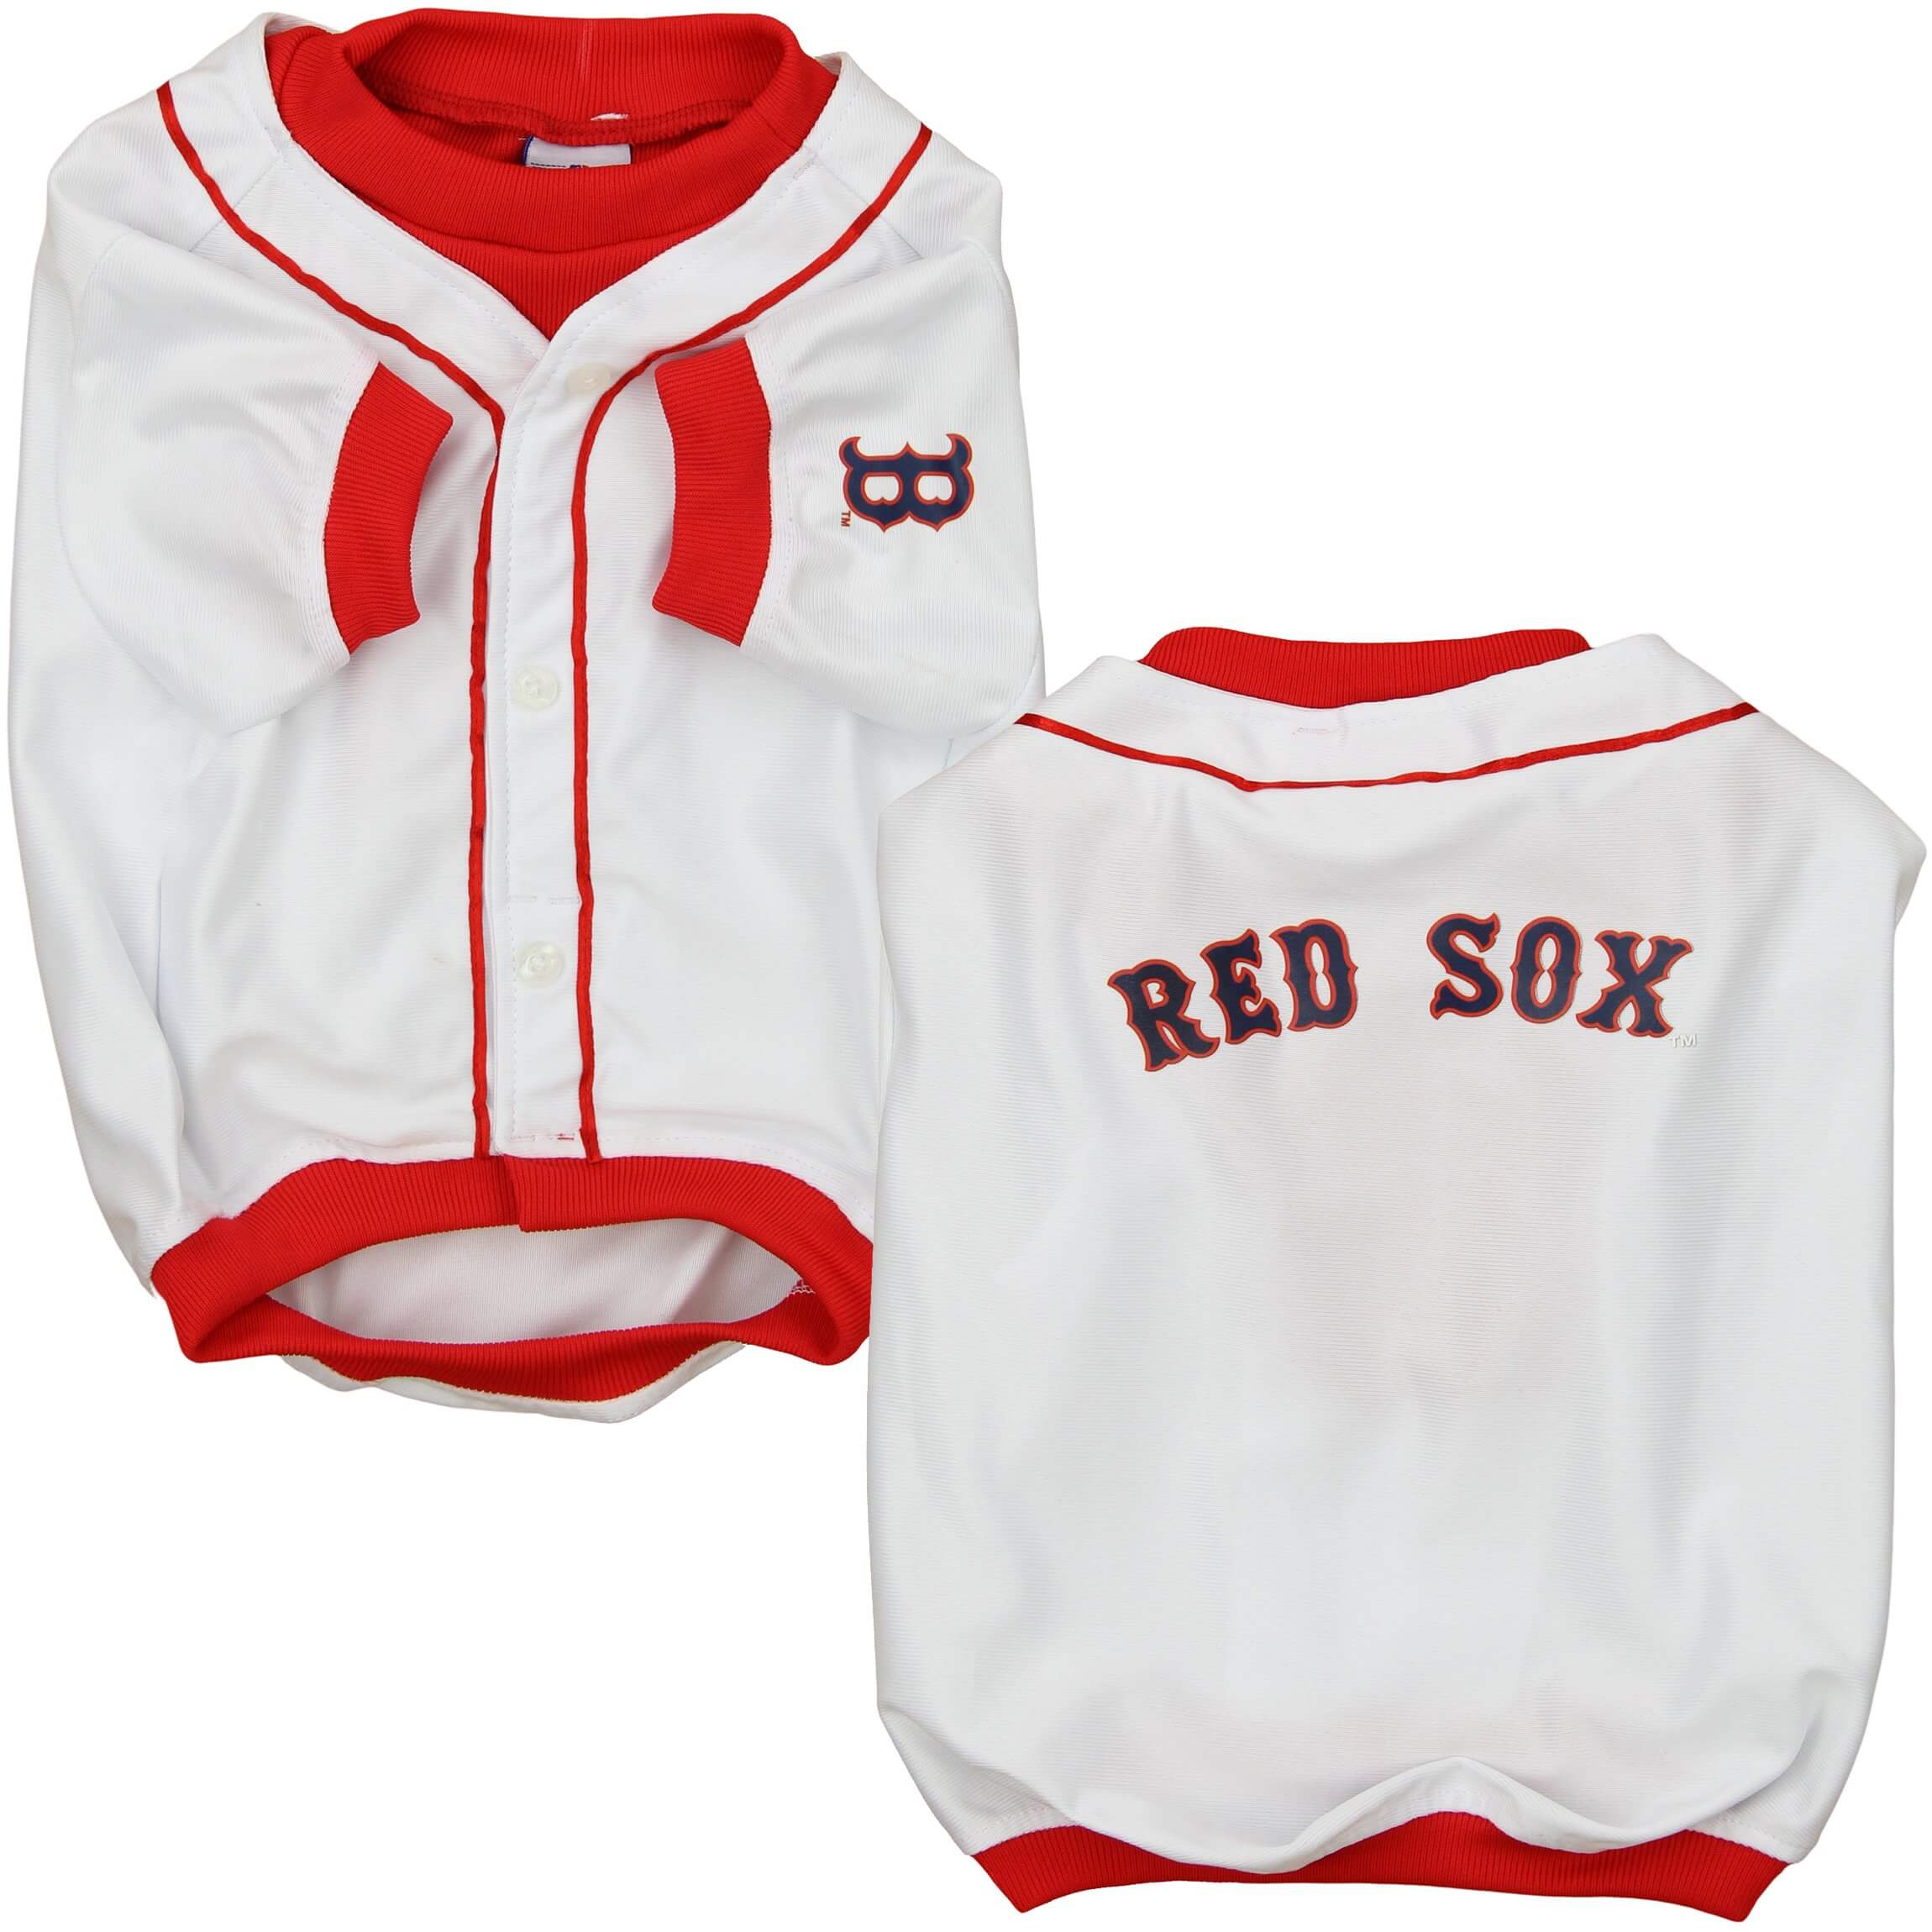 red sox jersey dog